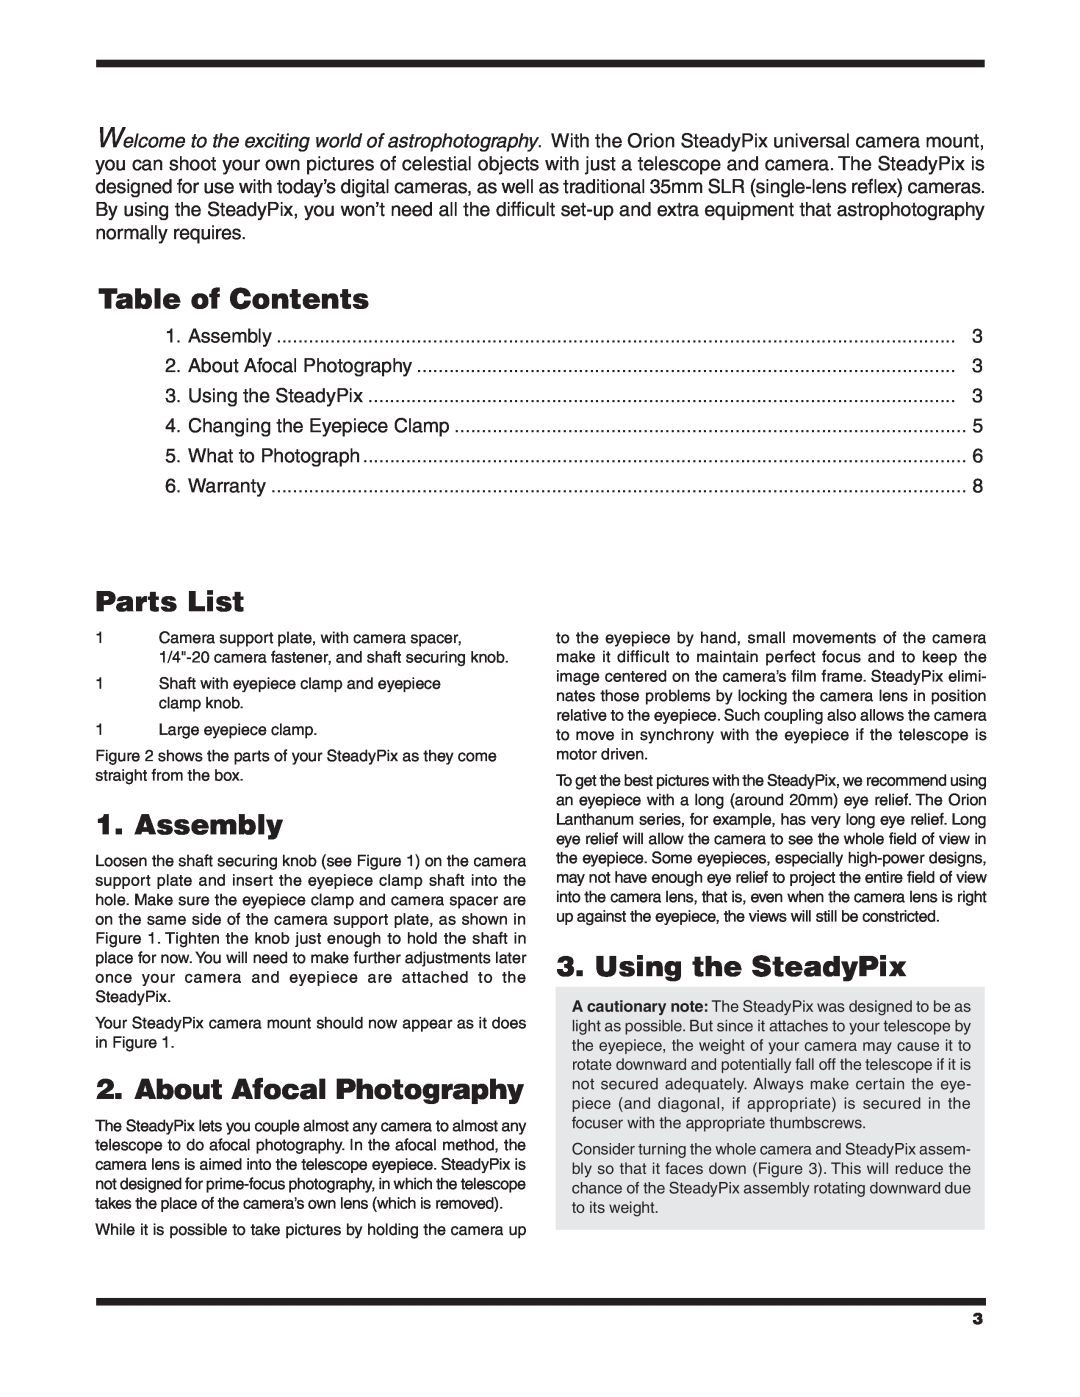 Orion 5228 instruction manual Table of Contents, Parts List, Assembly, About Afocal Photography, Using the SteadyPix 